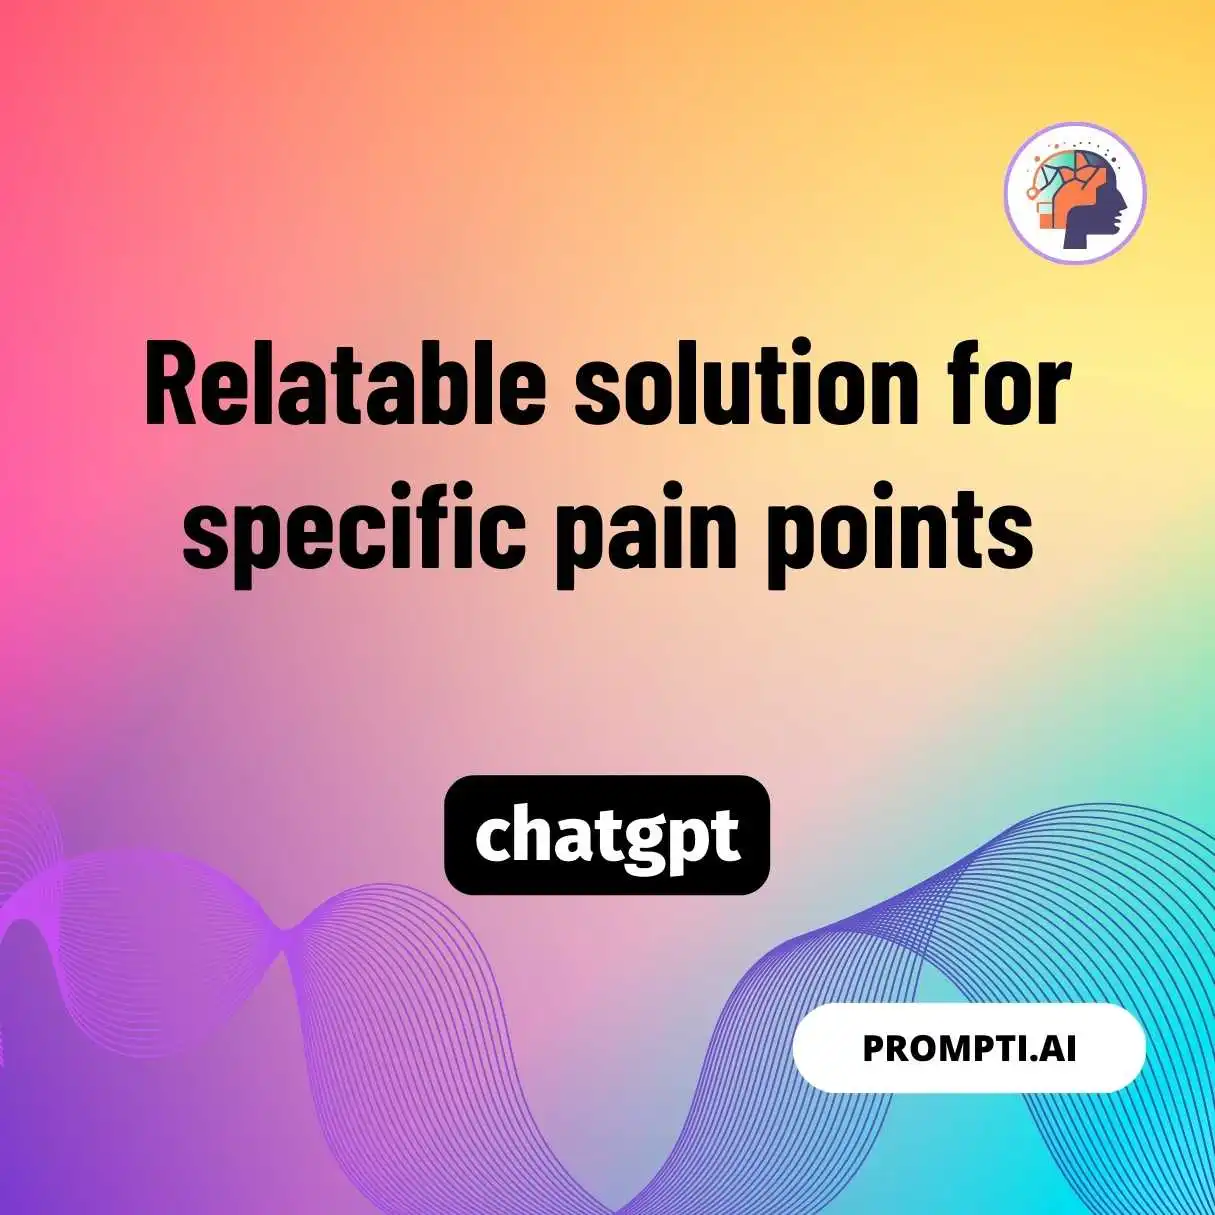 Relatable solution for specific pain points